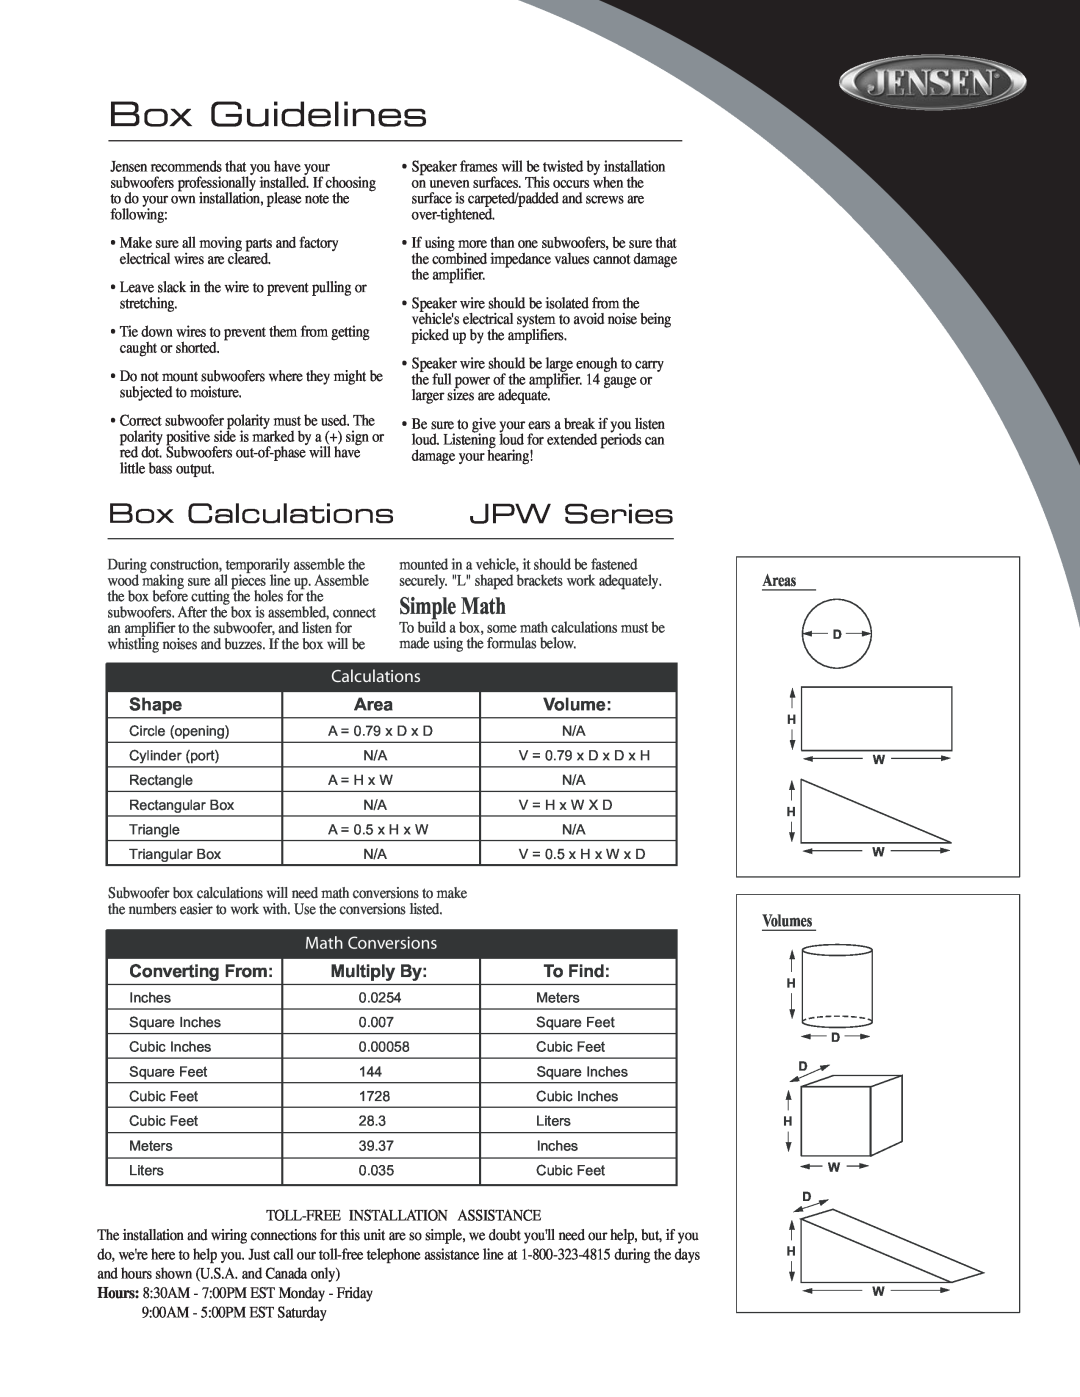 Audiovox JPW124 Shape, Converting From, Multiply By, To Find, Areas, Volumes, Box Guidelines, Box Calculations 